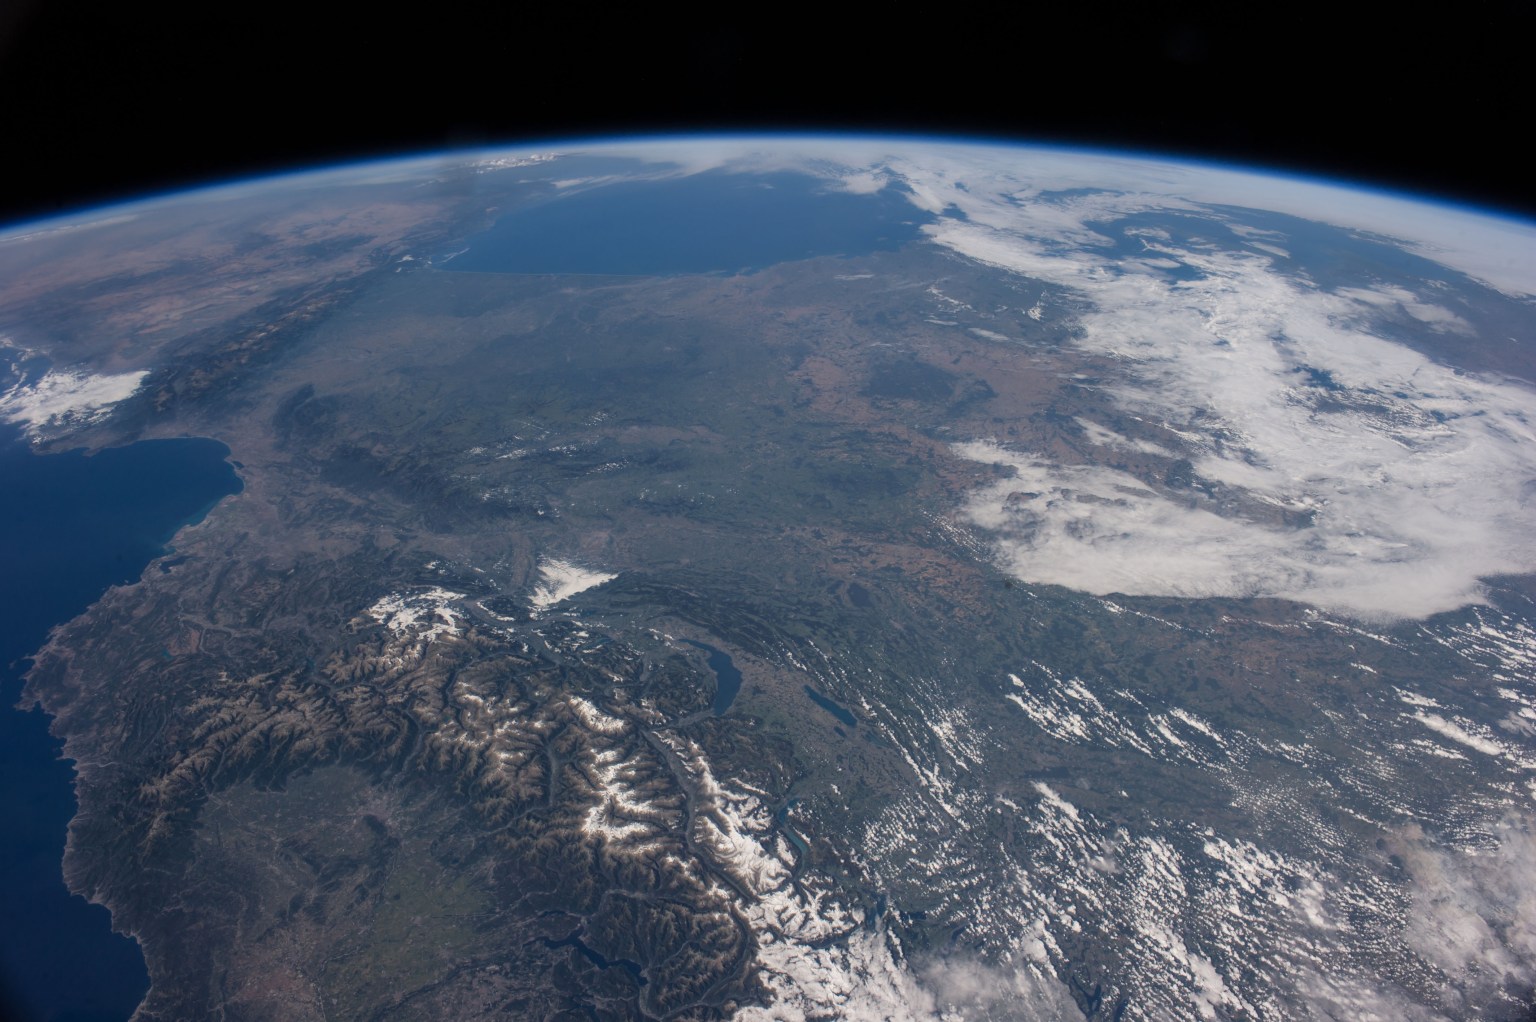 A photograph of Earth taken from orbit, with green and brown land dominating much of the image and blue ocean visible near the top of the planet's curved edge. In the foreground, mountain ridges cover the land in branching patterns, with snow dusting the tops of some peaks. White clouds cover the upper right portion of Earth's surface.